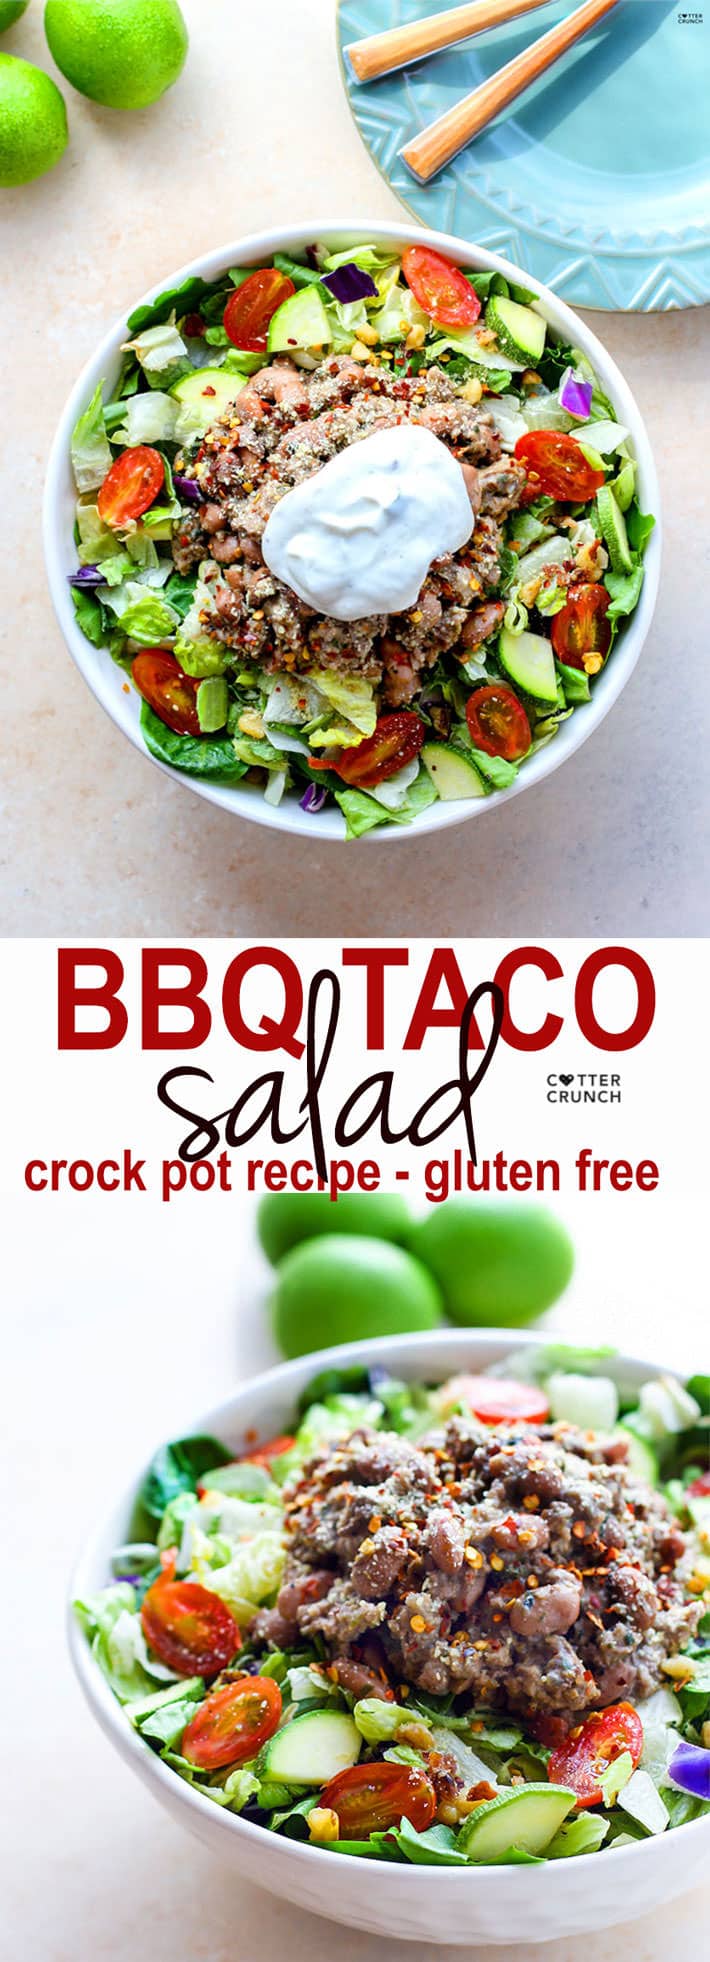 Gluten Free Crock Pot BBQ Taco Salad. Taco Salad with a little BBQ kick, and all in the crock pot. Easy to make, healthy, and perfect to use for multiple meals!